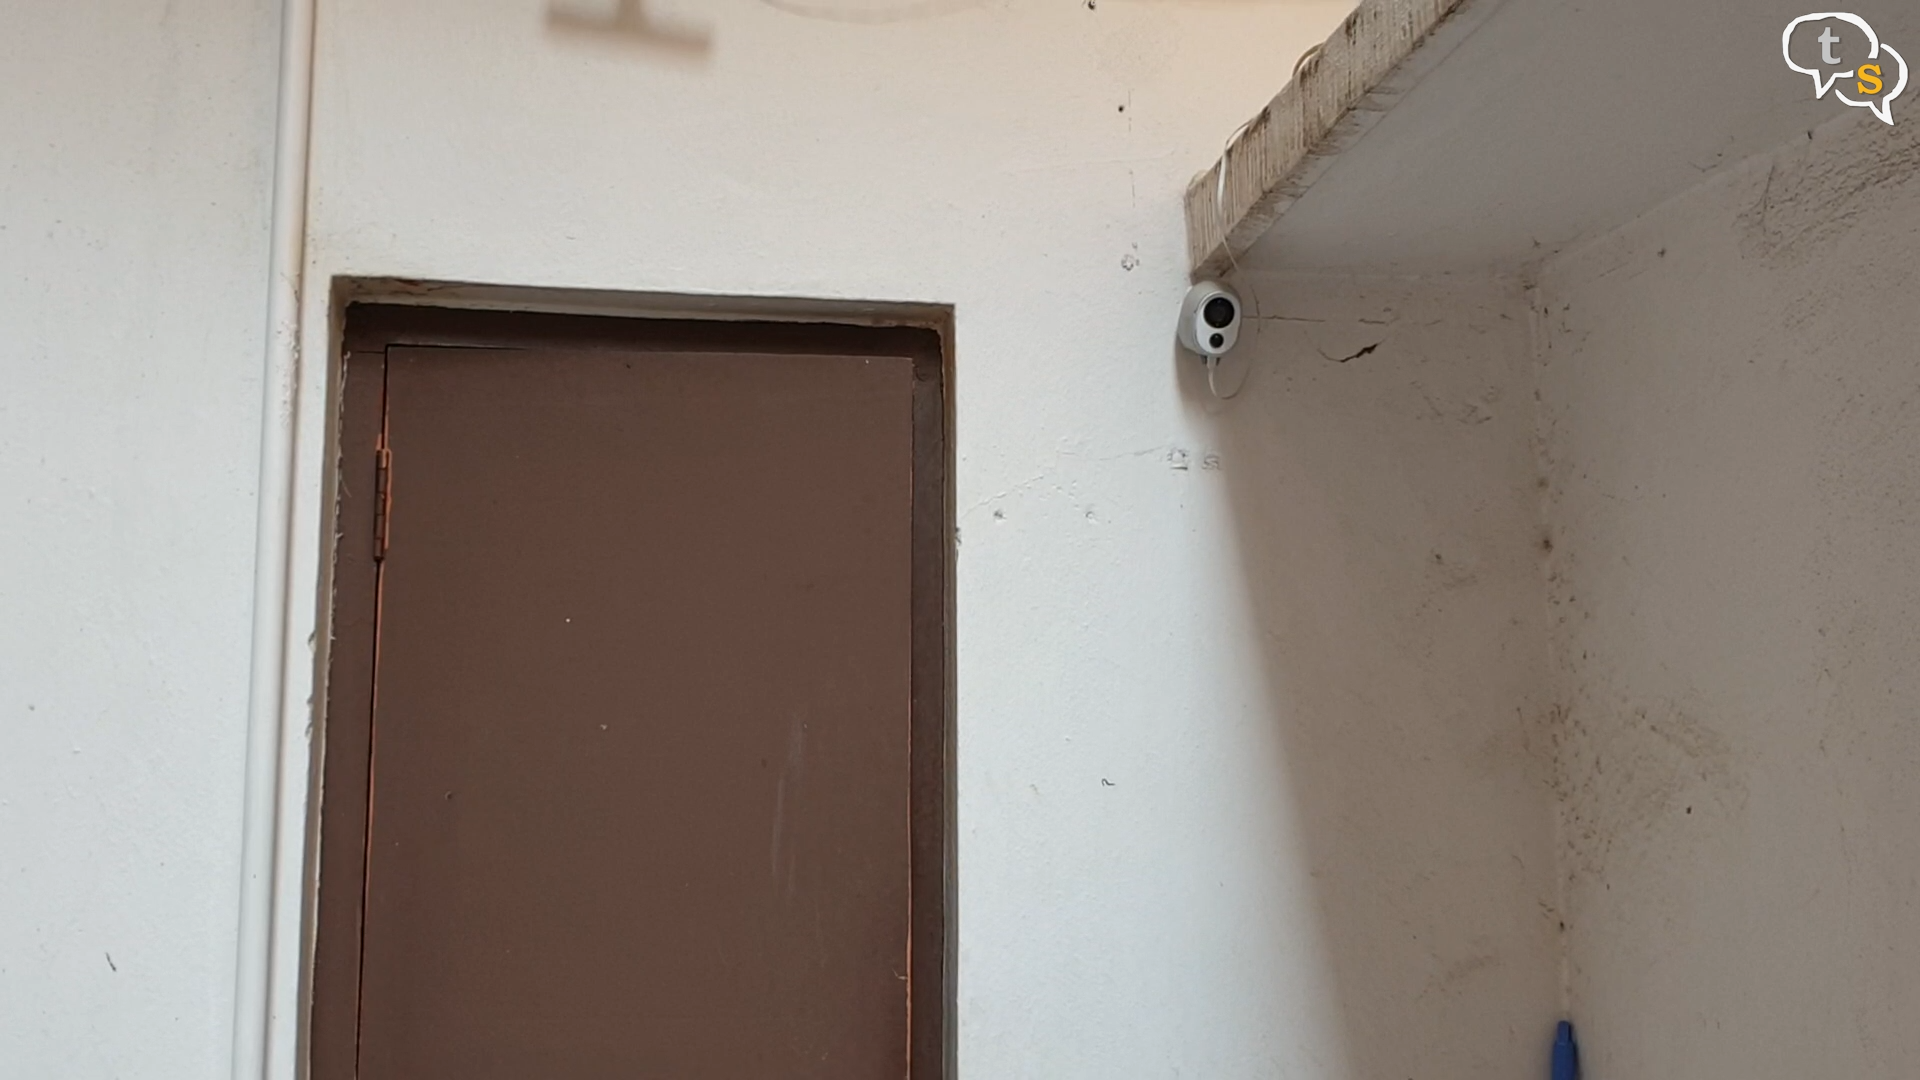 Mounted at a height active pixel wifi battery camera